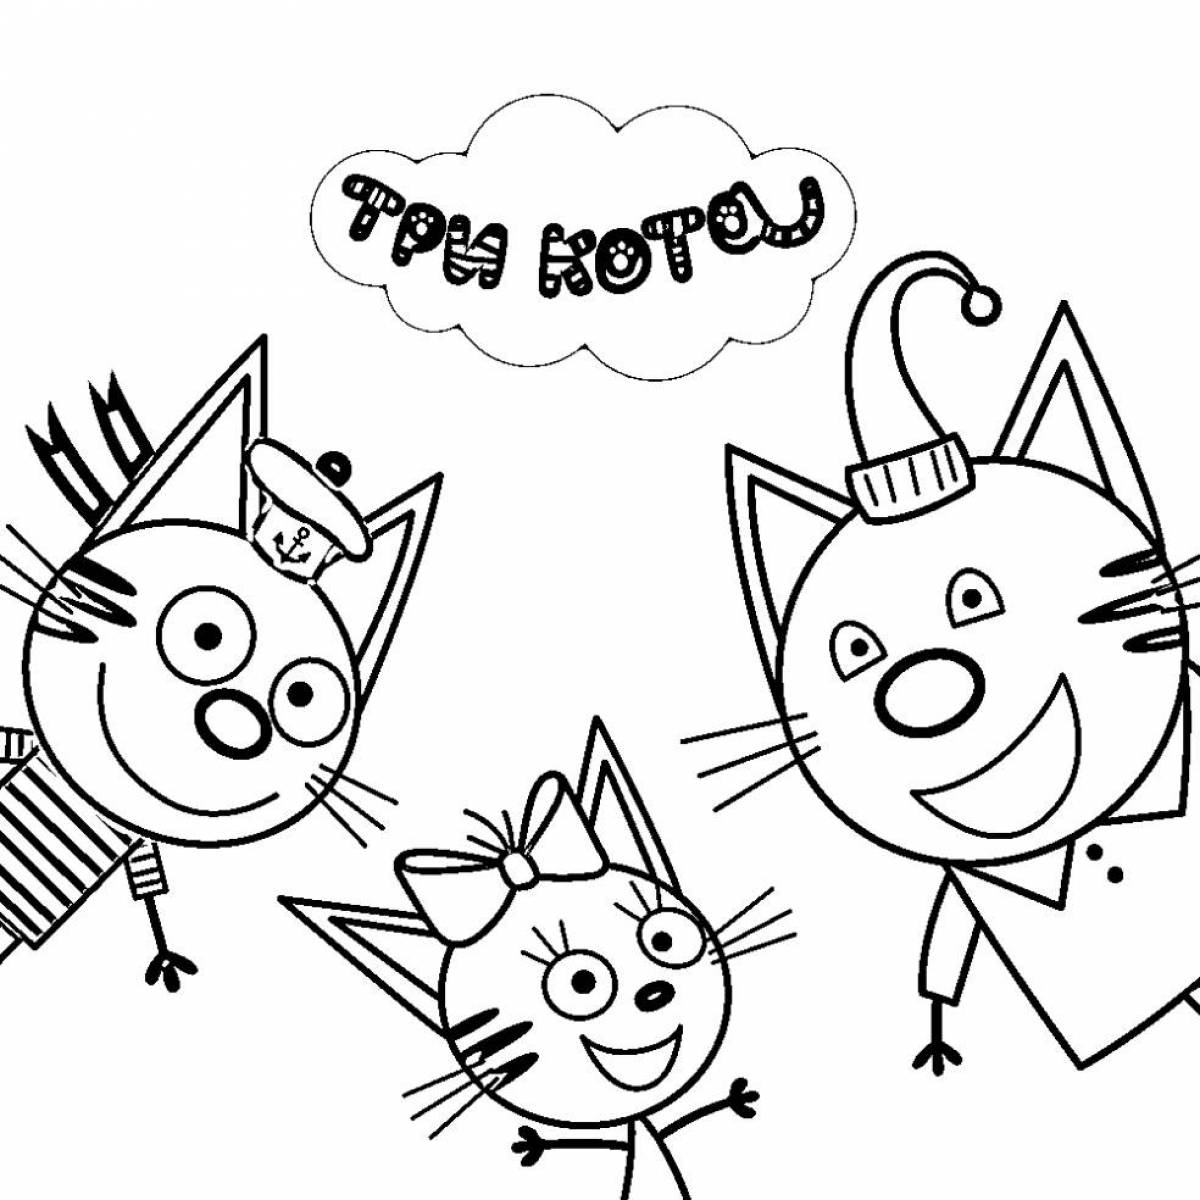 Three cats animated coloring book for girls